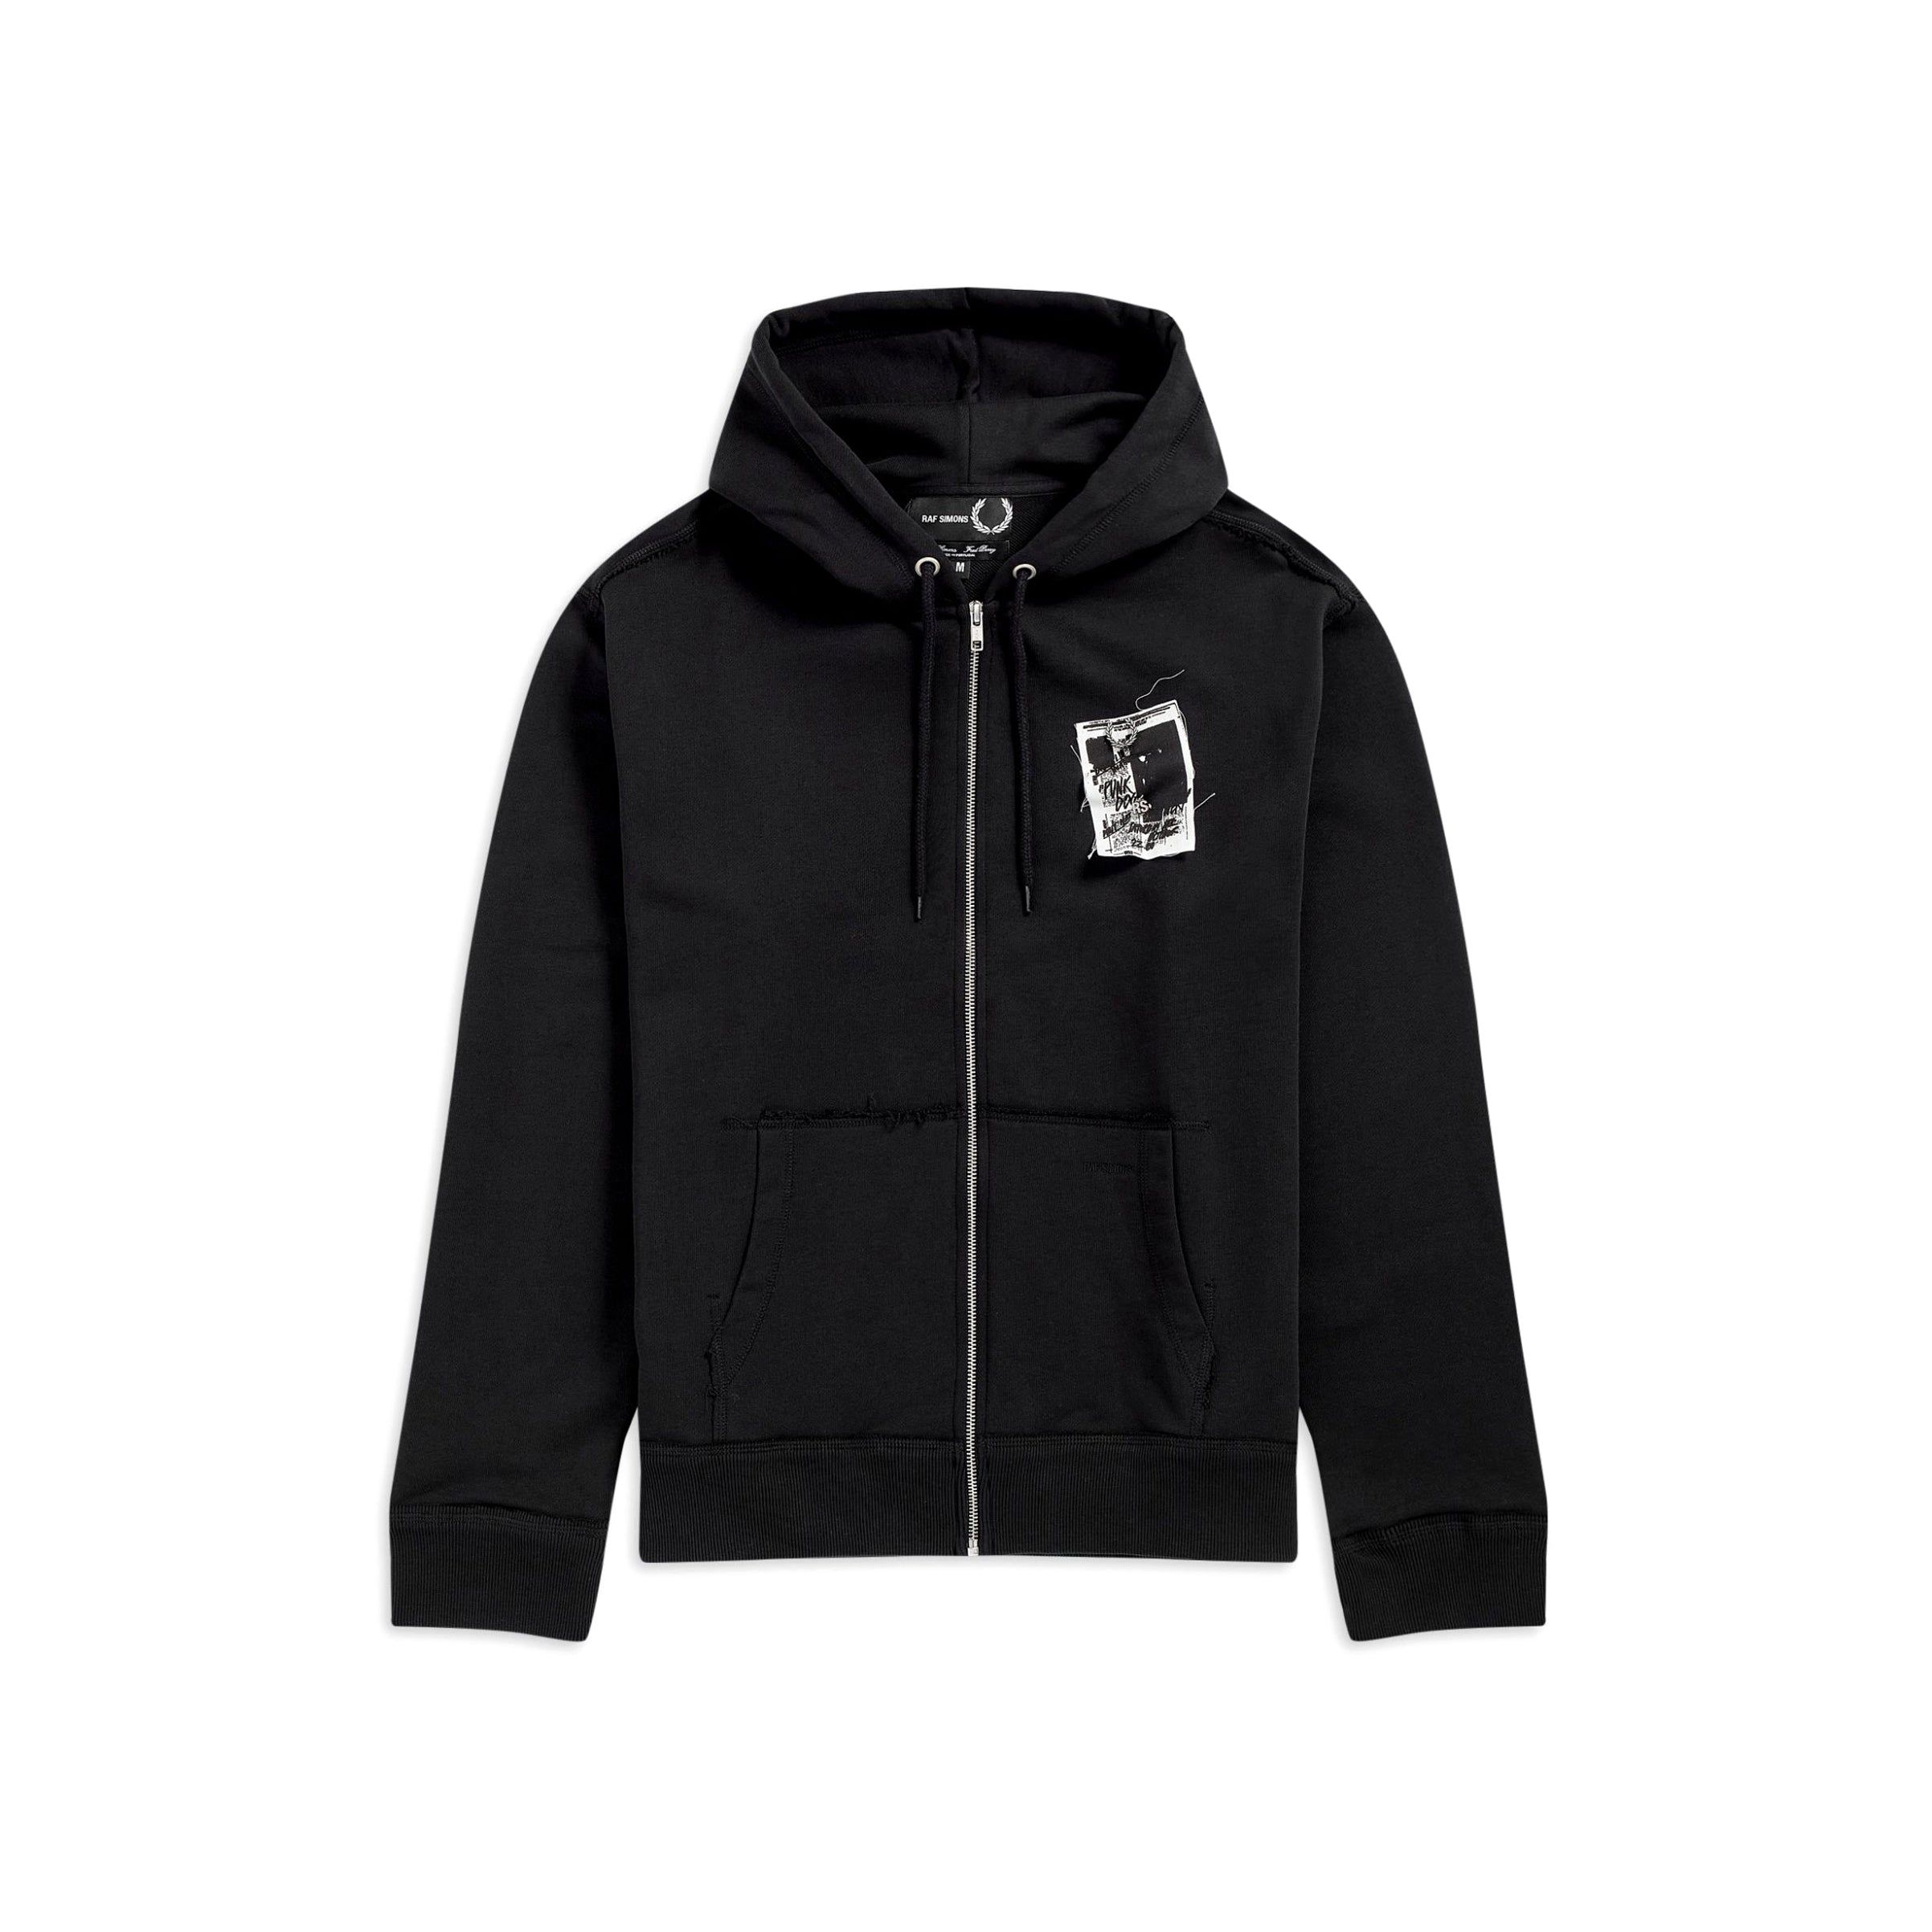 Fred Perry x Raf Simons Patched Zip Through Hoodie Black